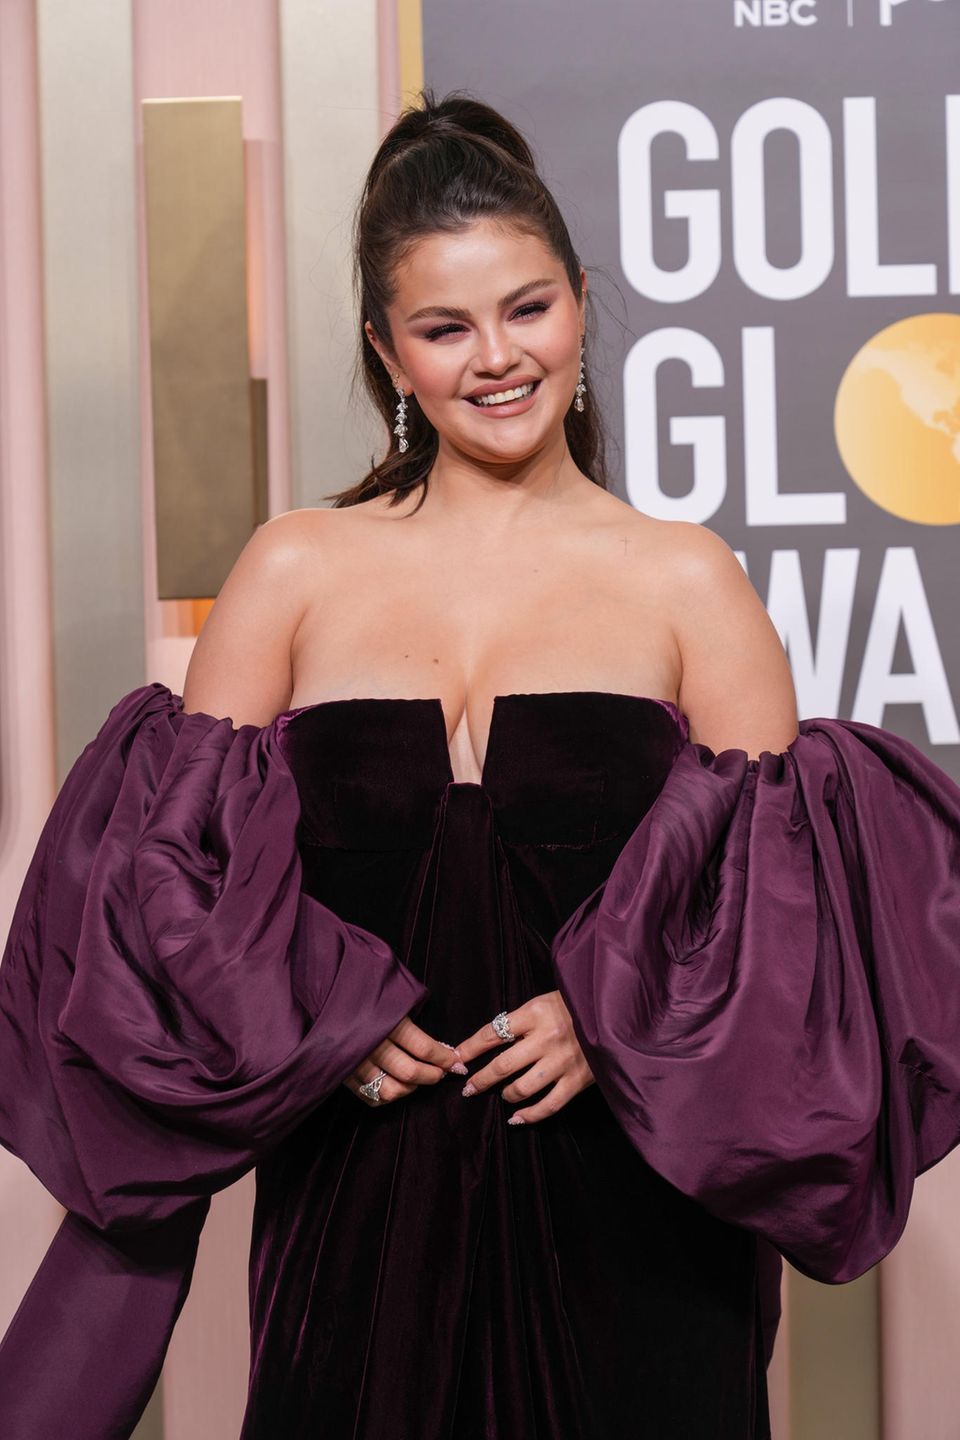 Selena Gomez chooses a robe in the darkest purple with extravagant puff sleeves in a different shade of purple